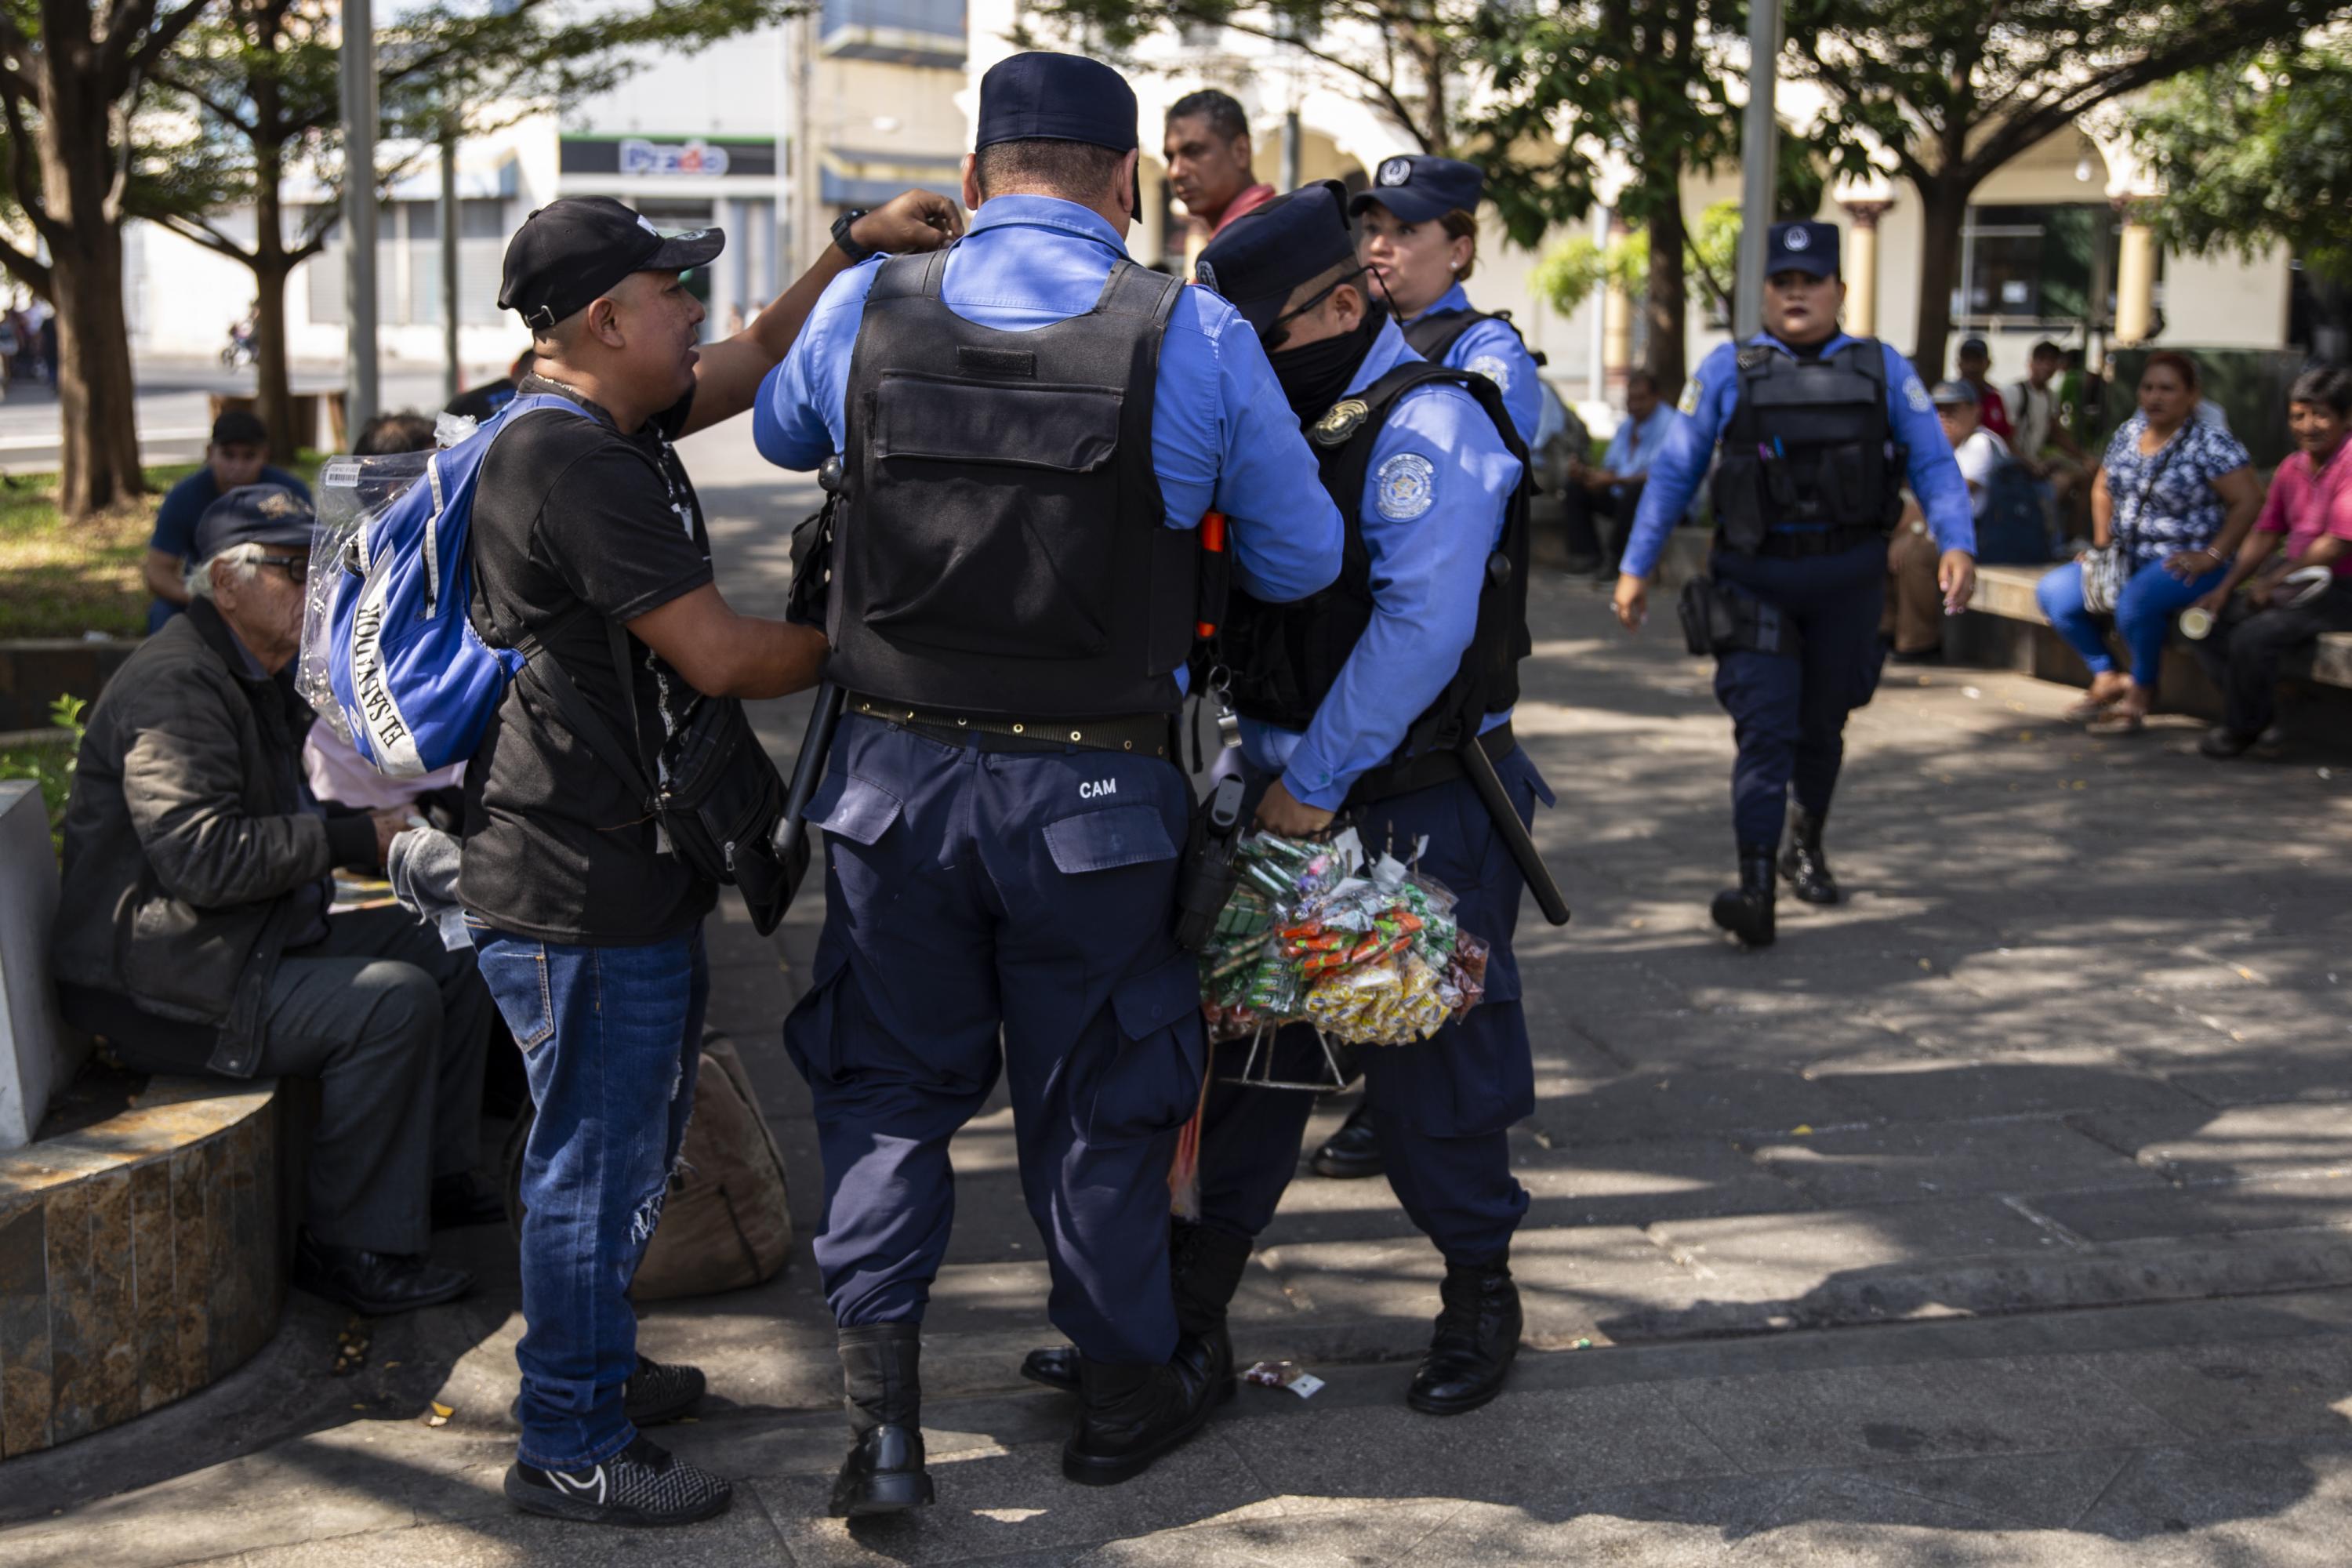 Three agents with the CAM, San Salvador’s metropolitan police department, surround Mario René Castro, a street vendor, in Plaza Libertad, in the city’s Historic Center. The agents tore up his bags and injured his left hand, strewing his candy on the ground. “These men are traitors,” said Castro, a 40-year-old native of the capital’s San Jacinto neighborhood, who has been street vending since he lost his job a year ago. On Sunday, February 14, Castro went downtown, where the city’s main blocks have become a flagship tourist destination promoted by the Bukele administration. “They [the police] came up on me by surprise and stole my $50 in sales,” he said. Castro is one of hundreds of vendors evicted from the city center. Many still attempt to sell their wares itinerantly, using carts or carrying the items and dodging CAM officers who chase them off to maintain the image of an orderly, clean, and vendor-free Historic Center. Photo by Víctor Peña.